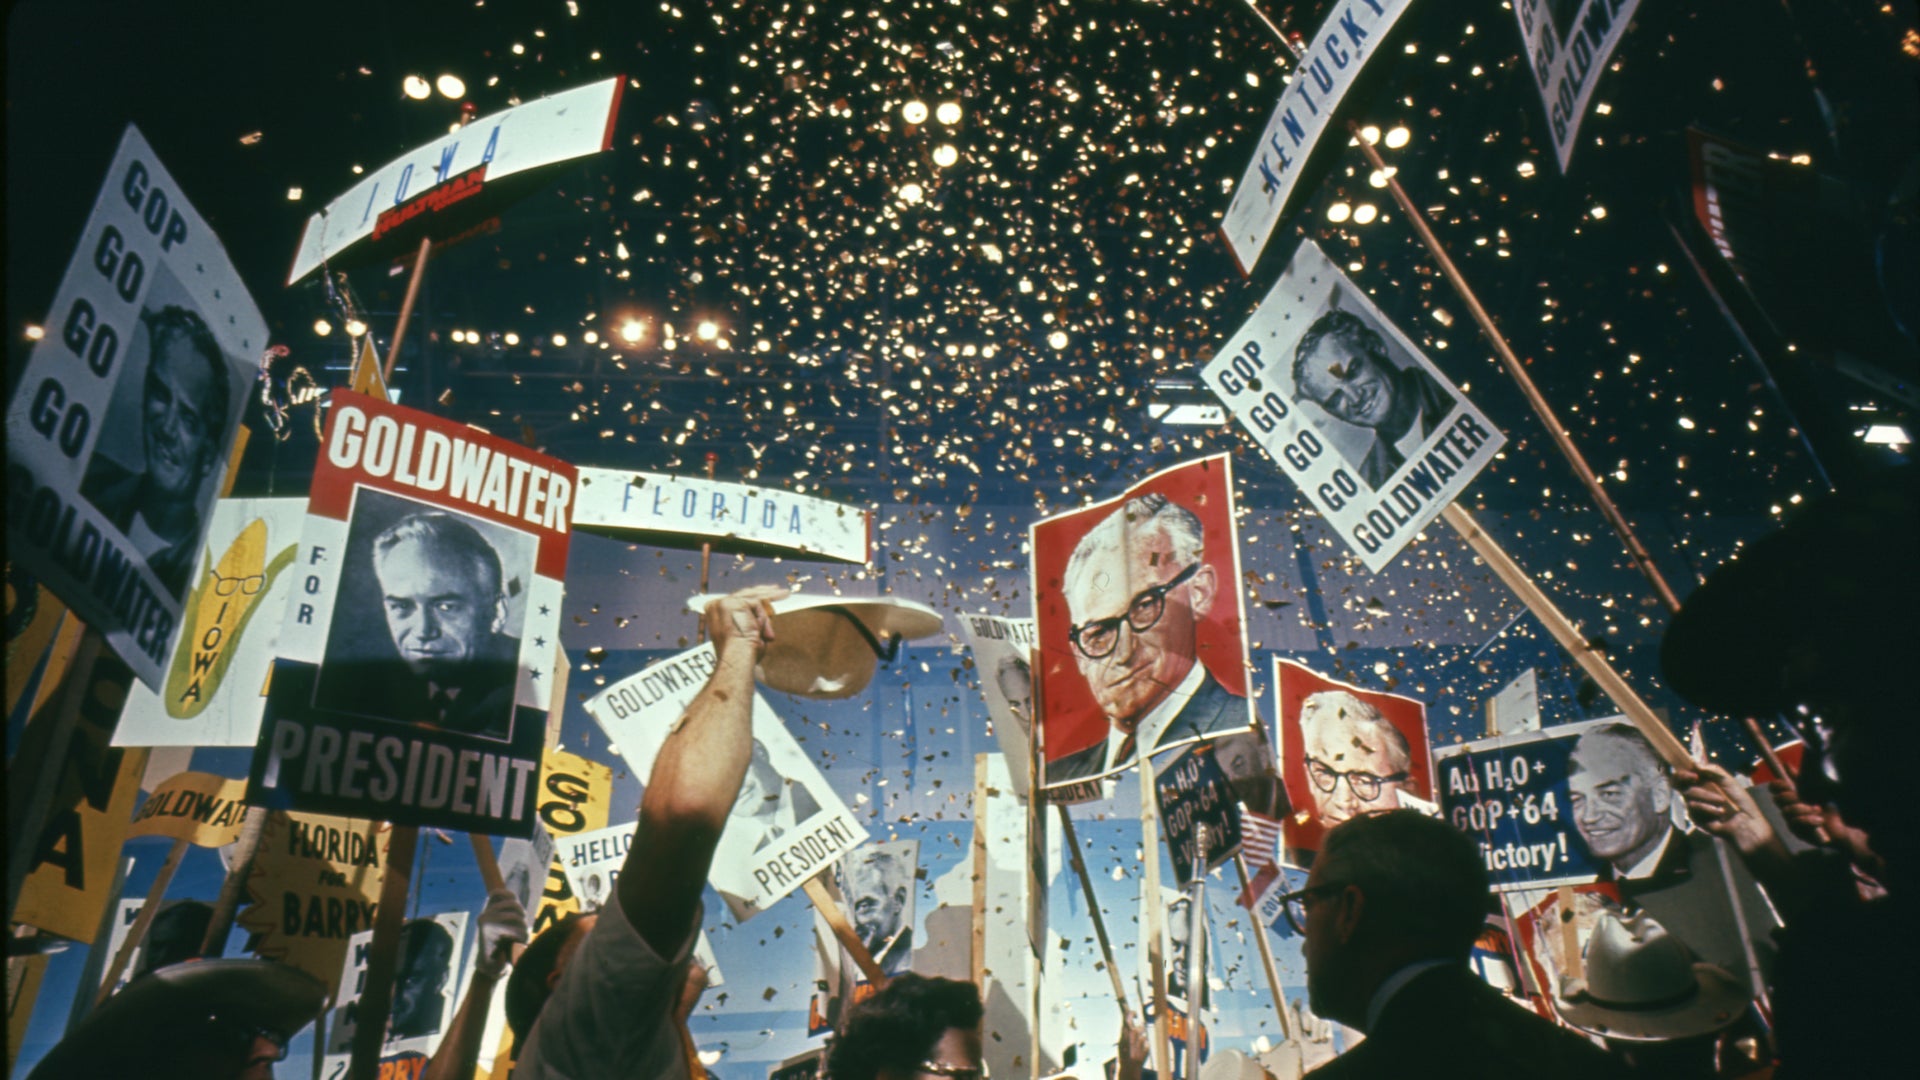 1964 united states presidential election